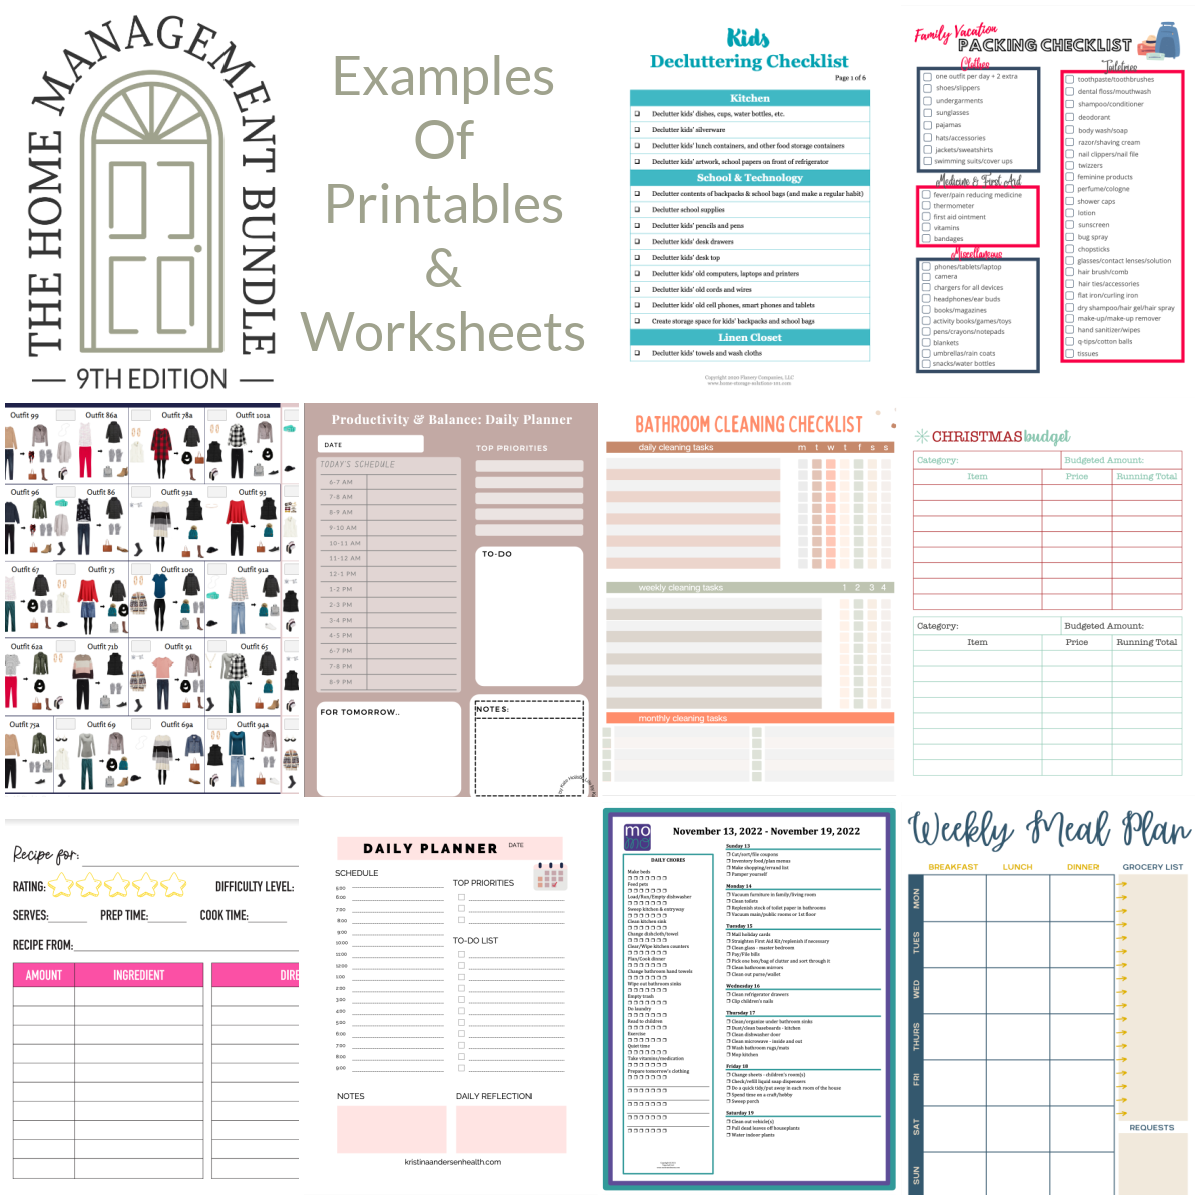 Examples of printables and worksheets in the Home Management Bundle